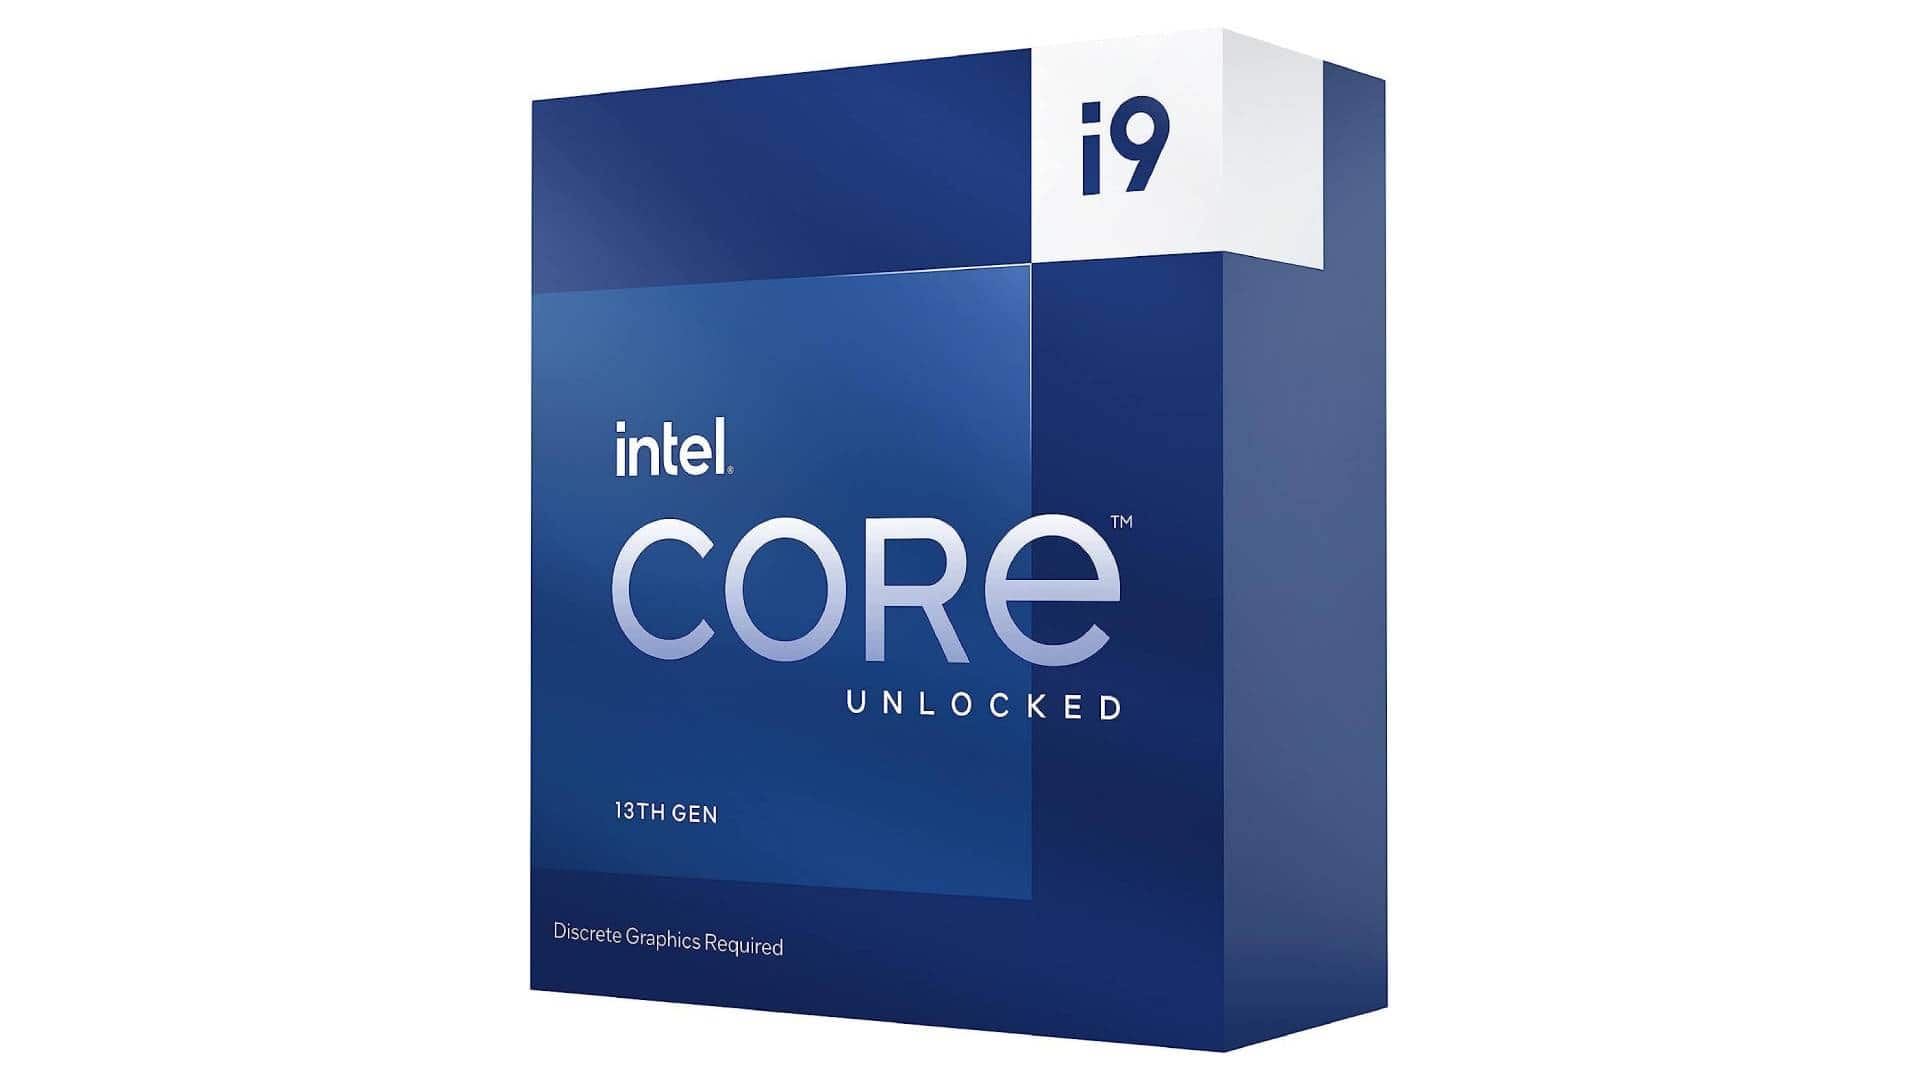 Product box of an Intel CPU, an intel core i9, 13th gen with the label "unlocked" indicating it is designed for overclocking, and a note "discrete graphics required